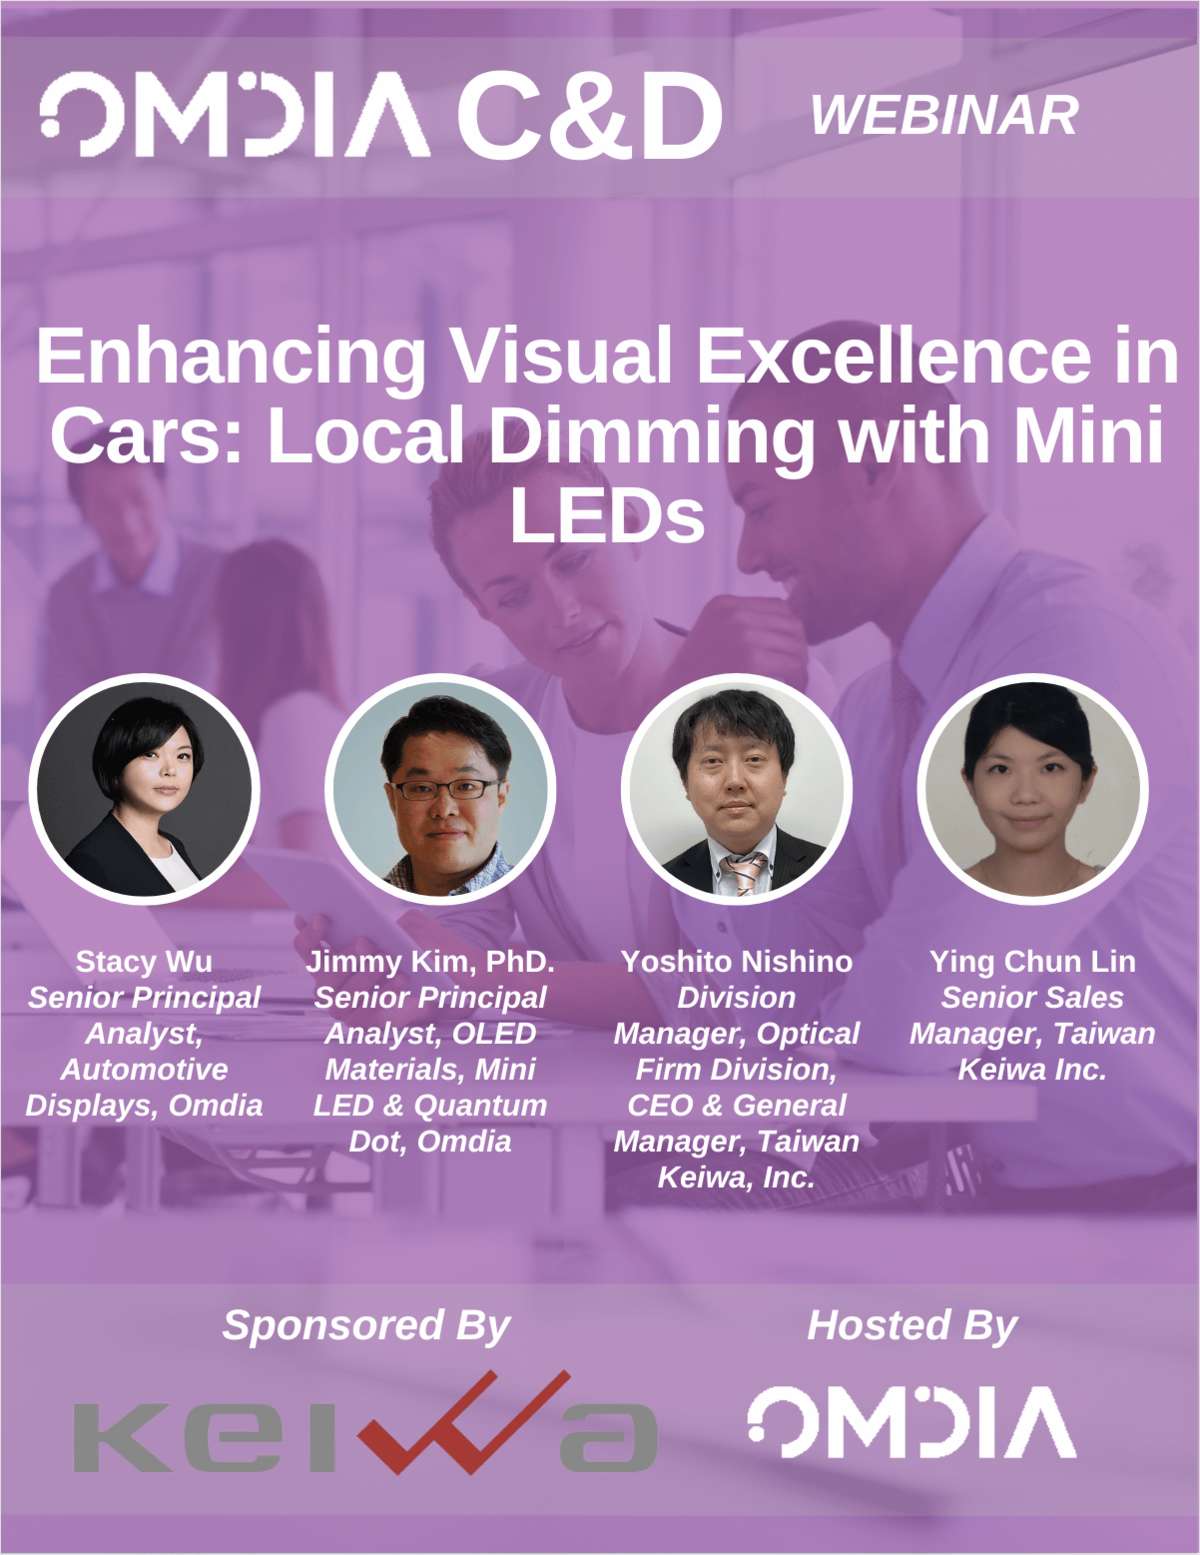 Enhancing Visual Excellence in Cars: Local Dimming with Mini LEDs